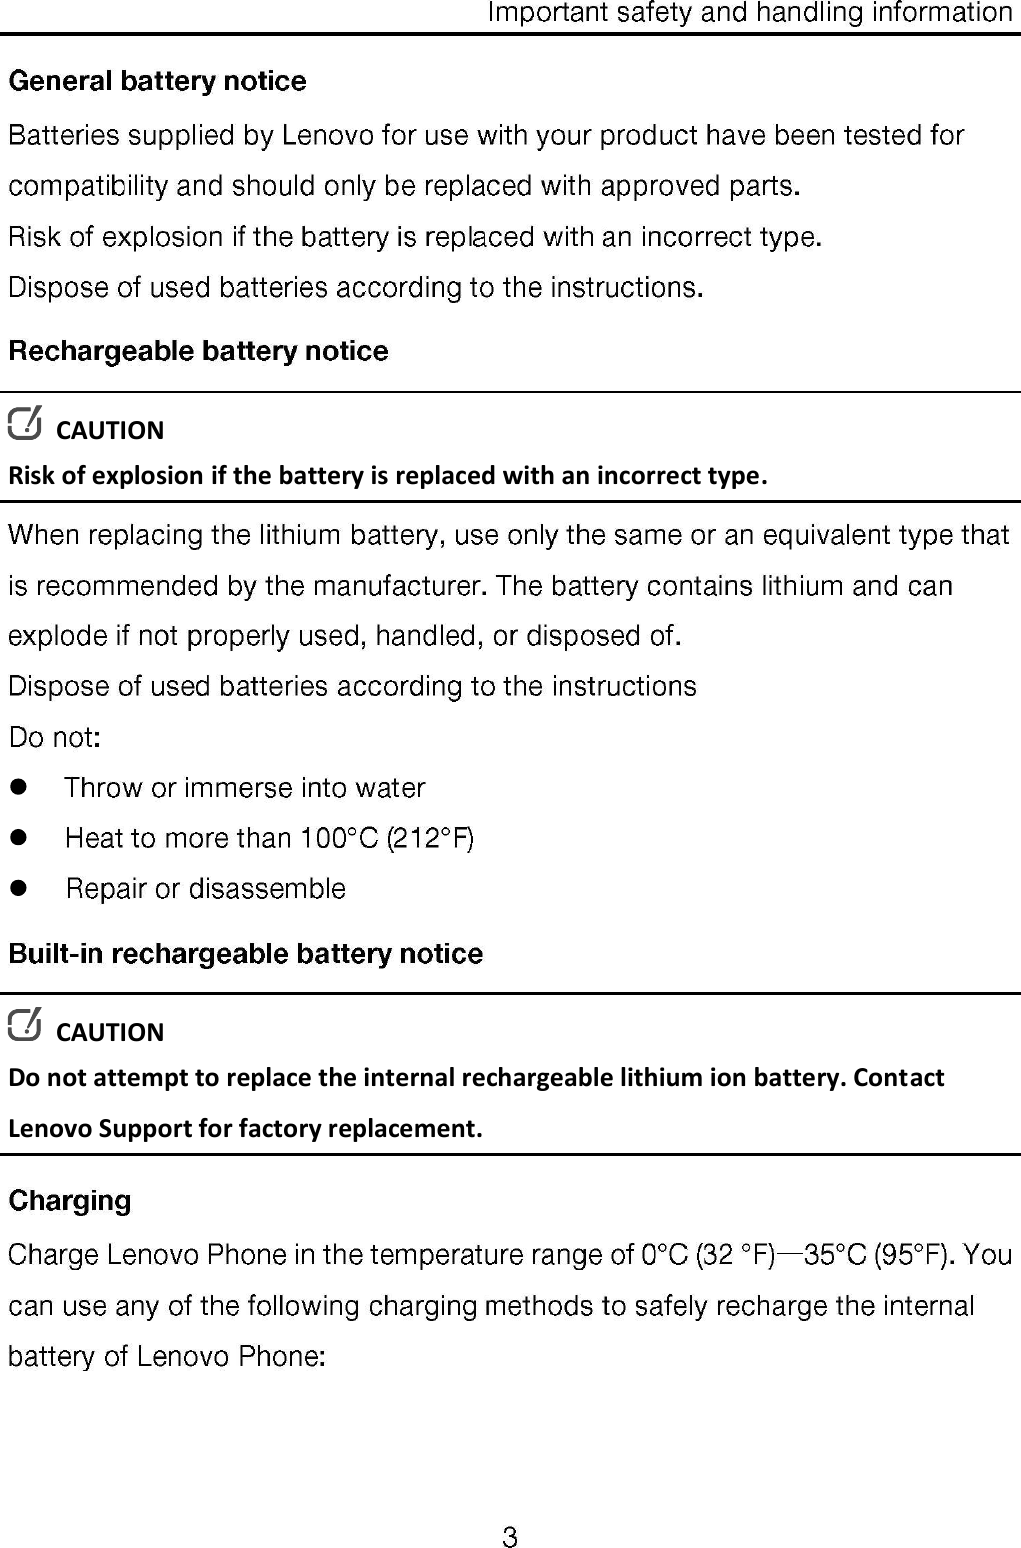   CAUTION Risk of explosion if the battery is replaced with an incorrect type.   CAUTION Do not attempt to replace the internal rechargeable lithium ion battery. Contact Lenovo Support for factory replacement. 